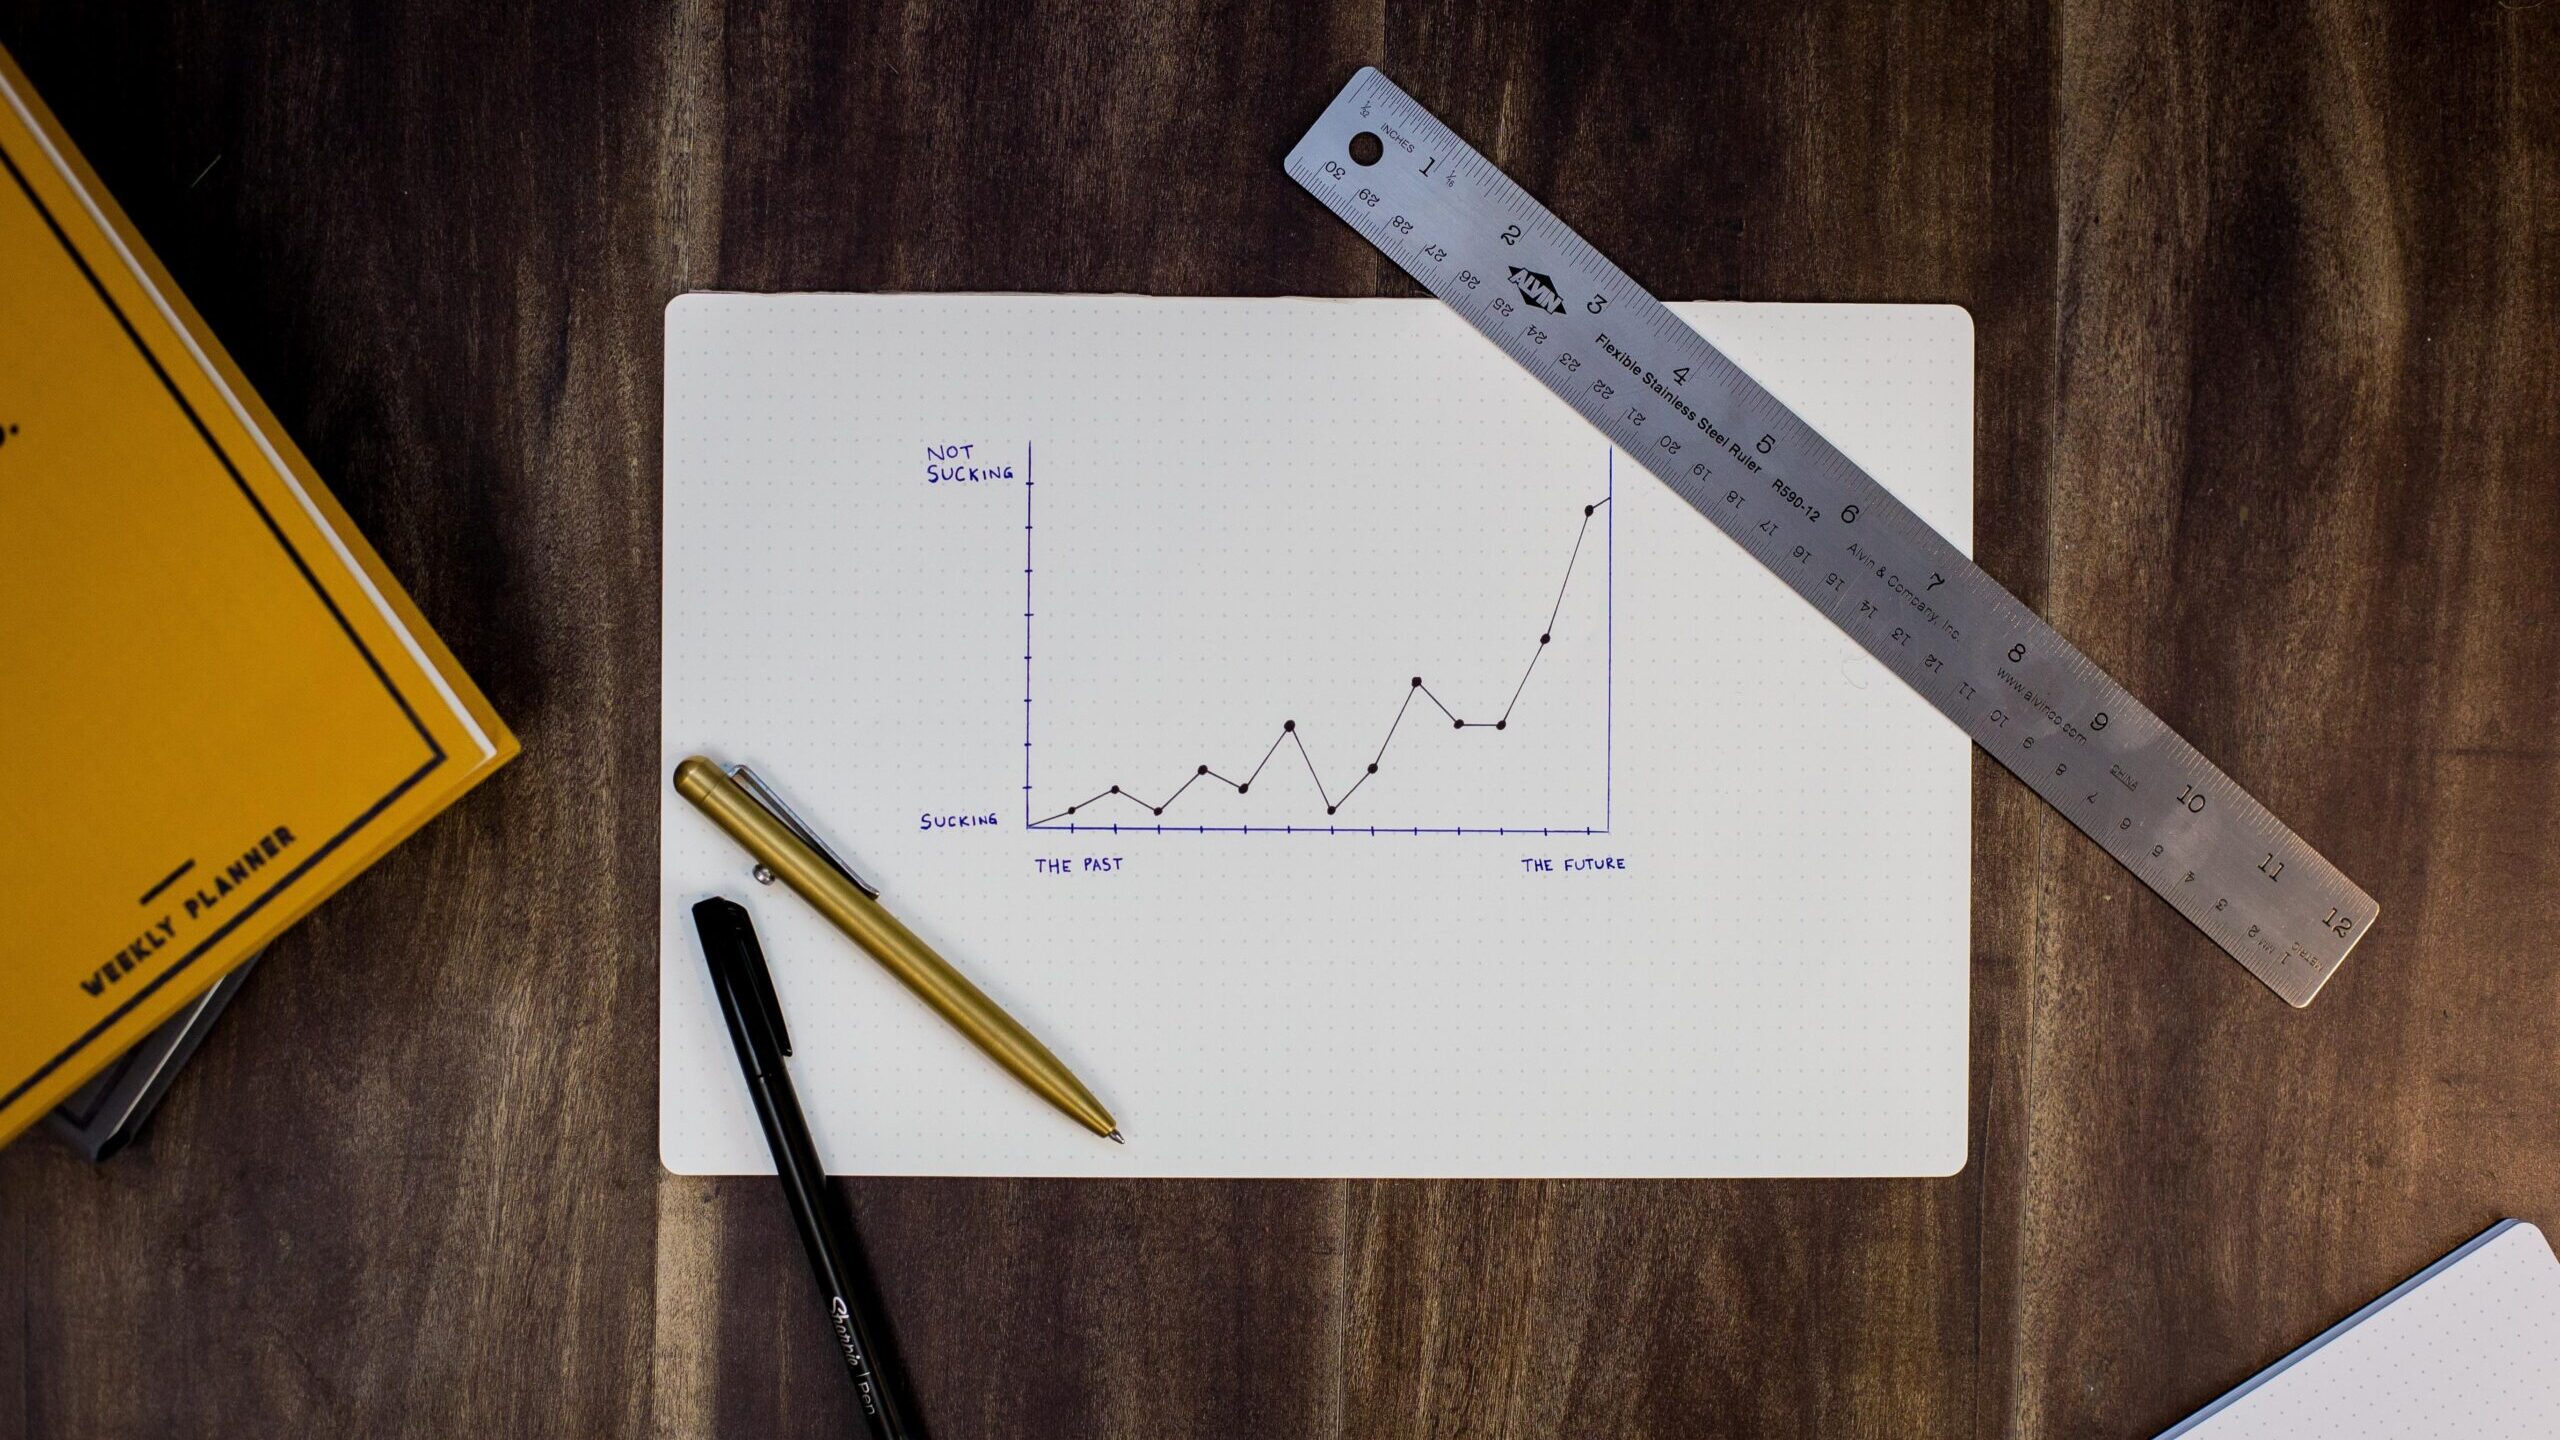 Ruler on a piece of paper with a line graph and pens.